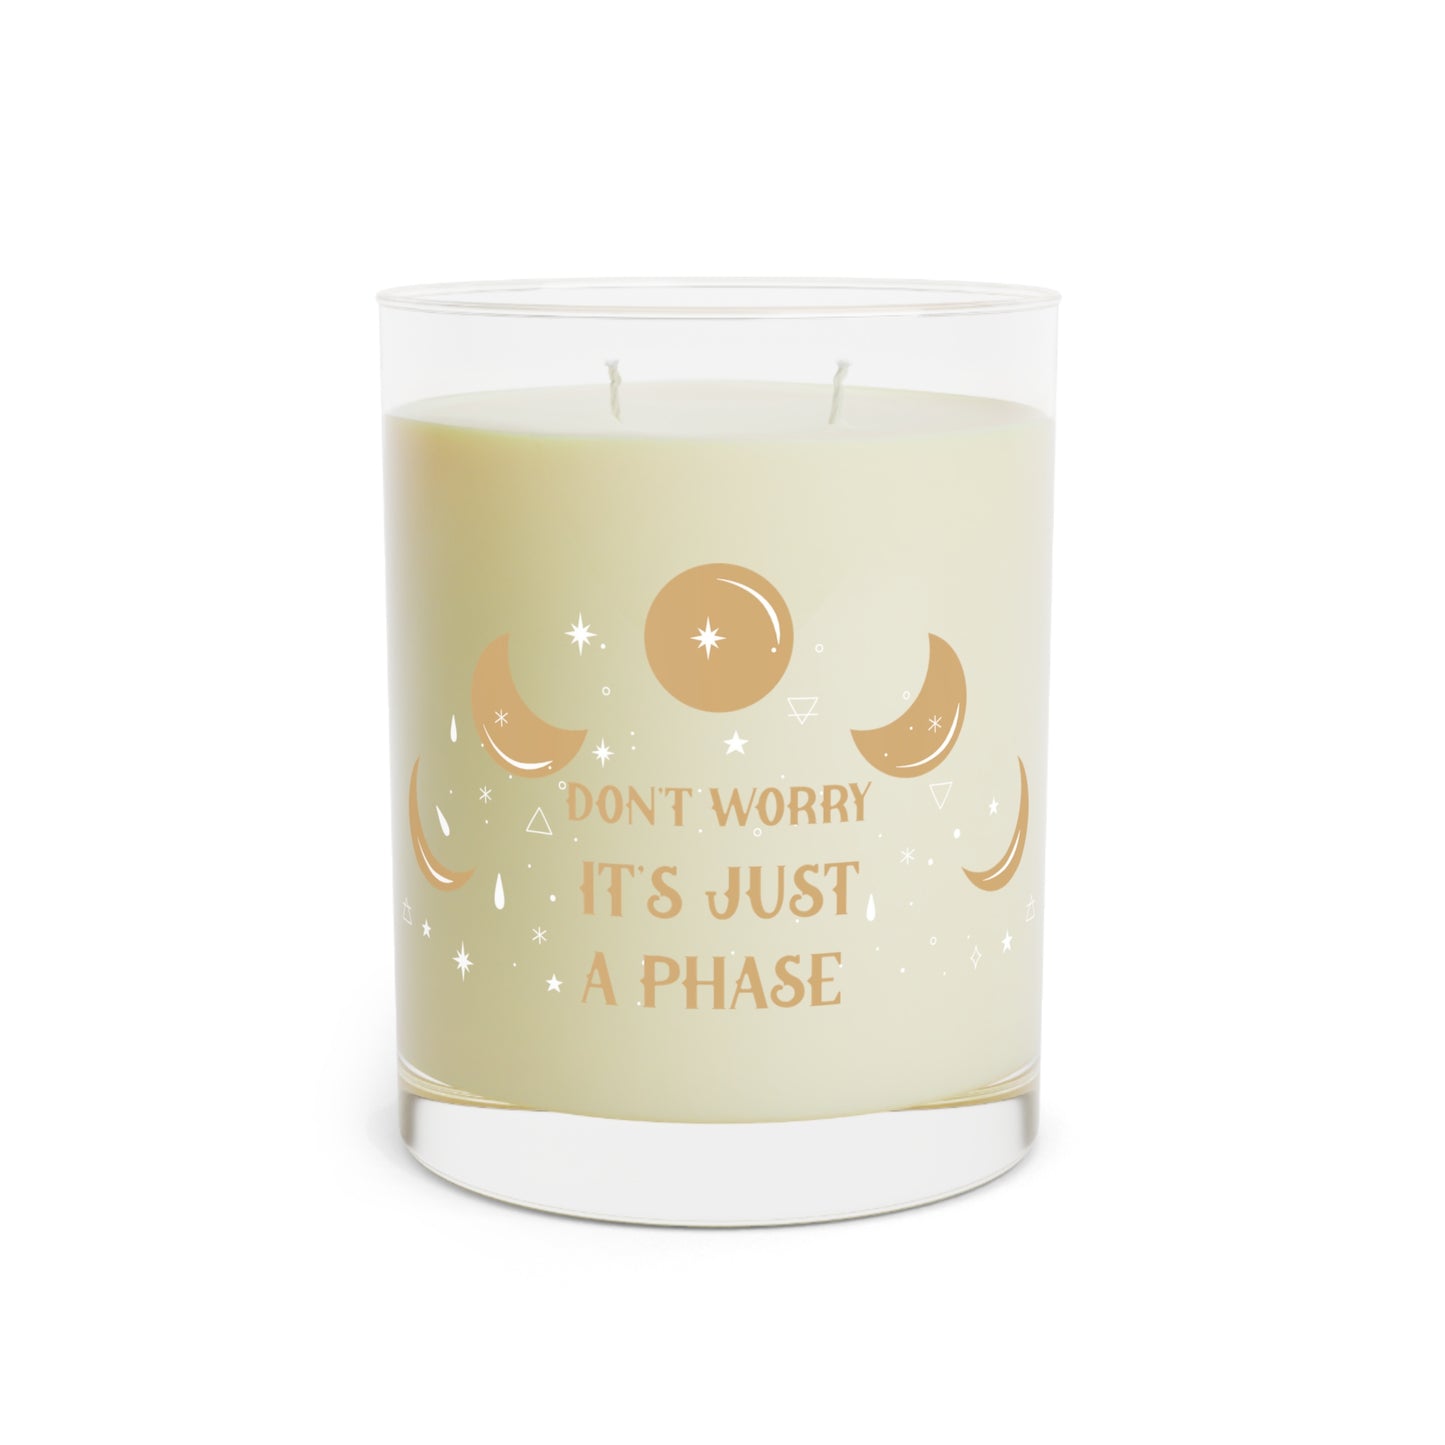 Its Just a Phase Scented Candle